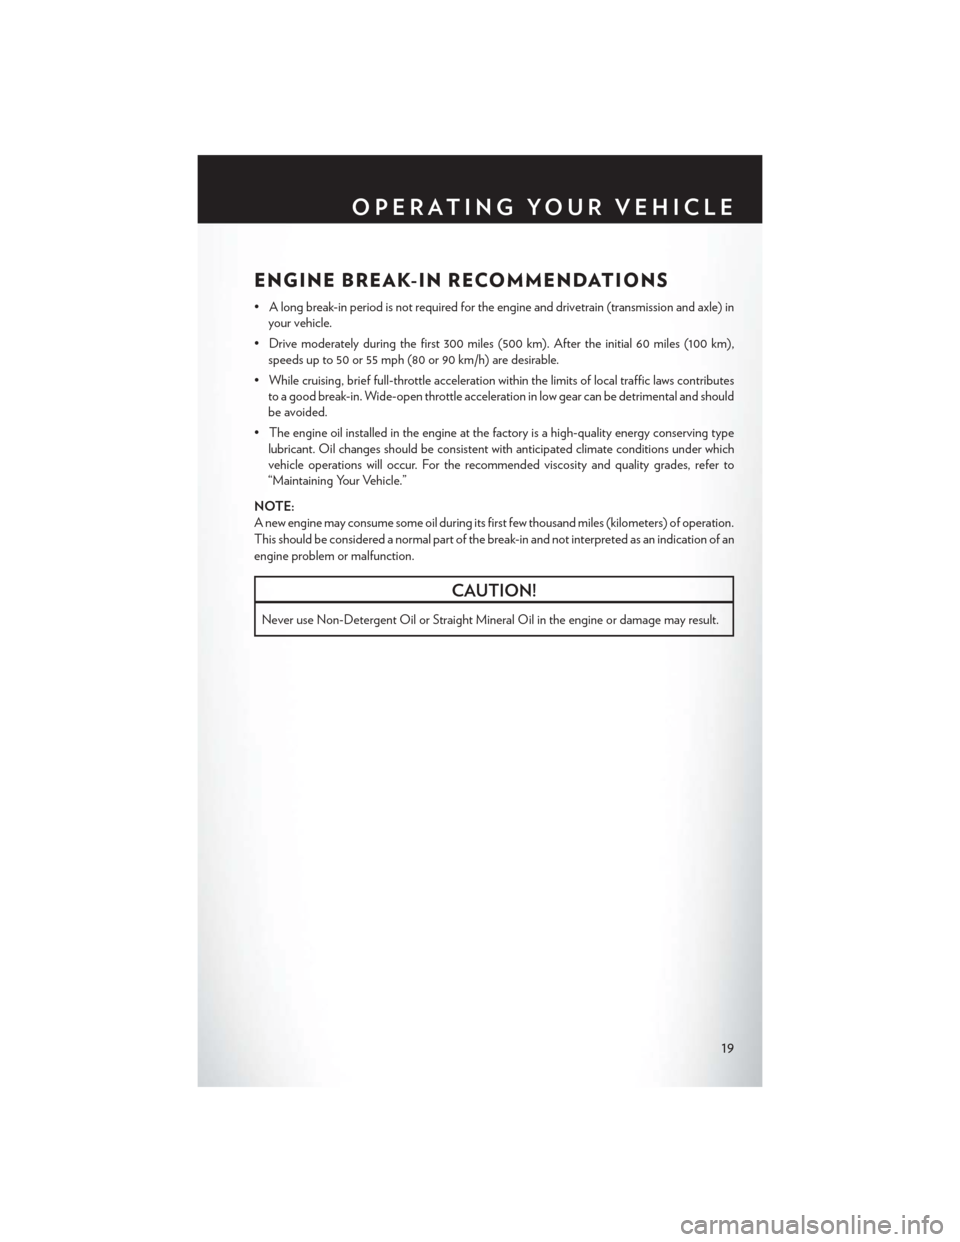 CHRYSLER 200 2014 1.G User Guide ENGINE BREAK-IN RECOMMENDATIONS
• A long break-in period is not required for the engine and drivetrain (transmission and axle) inyour vehicle.
• Drive moderately during the first 300 miles (500 km